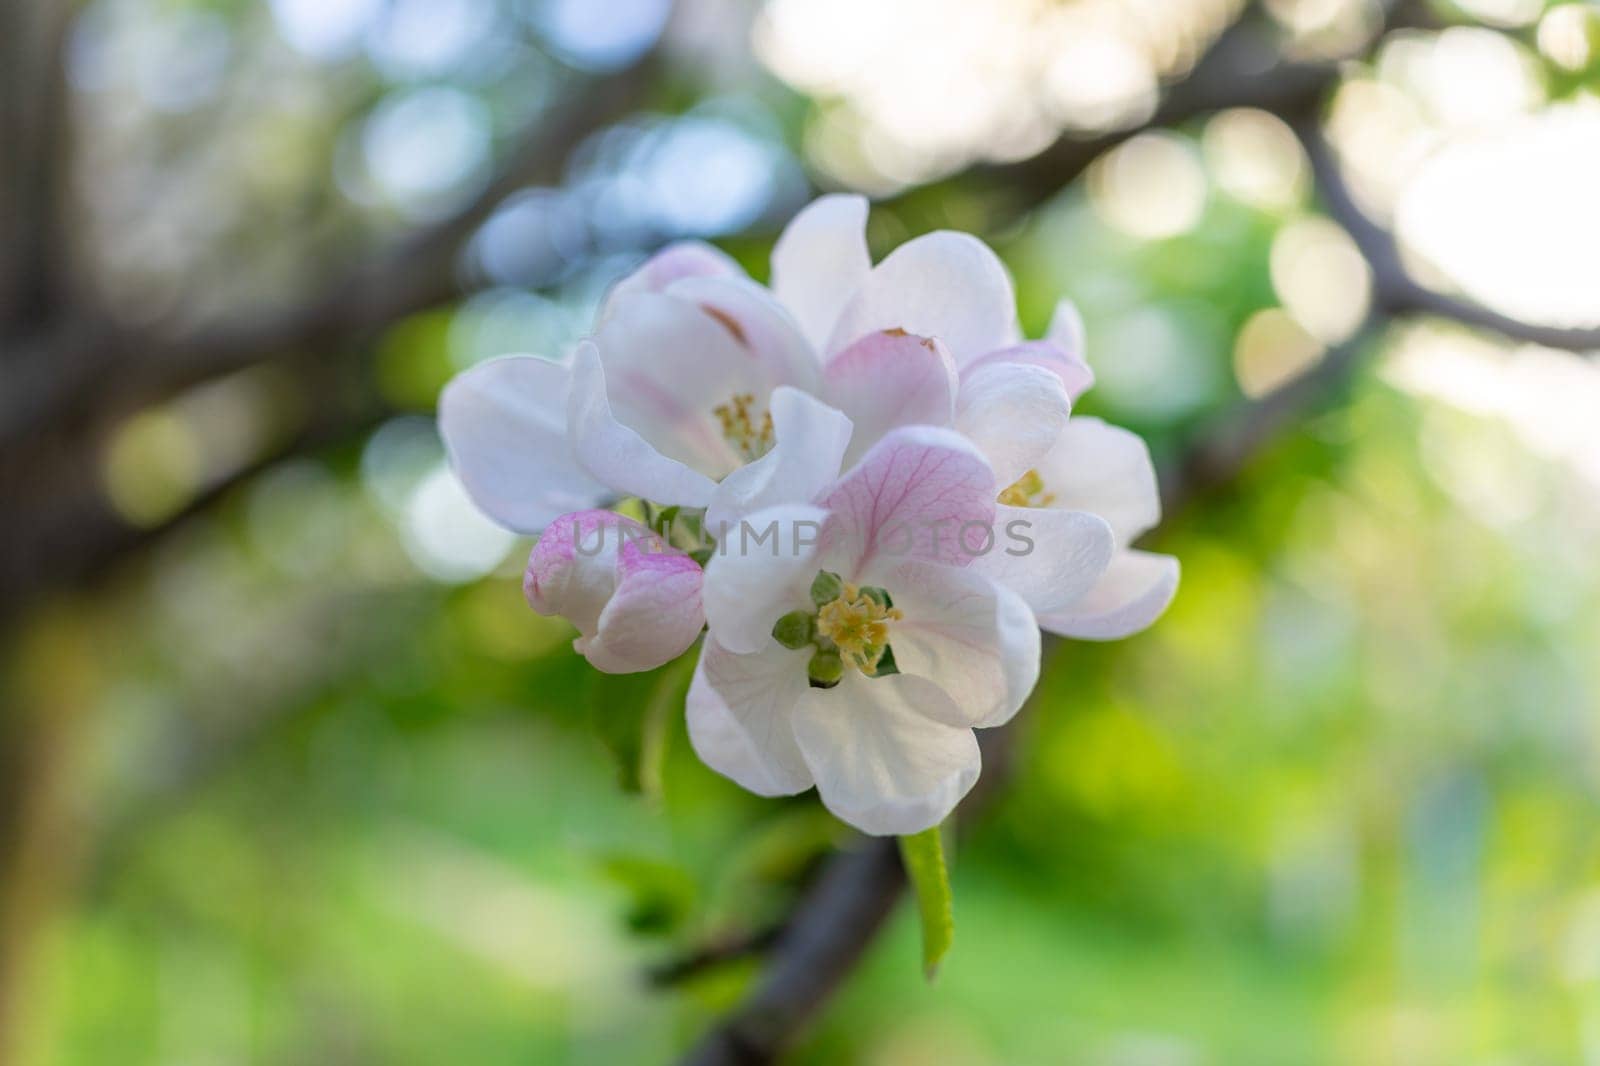 A beautiful inflorescence of apple flowers by Serhii_Voroshchuk